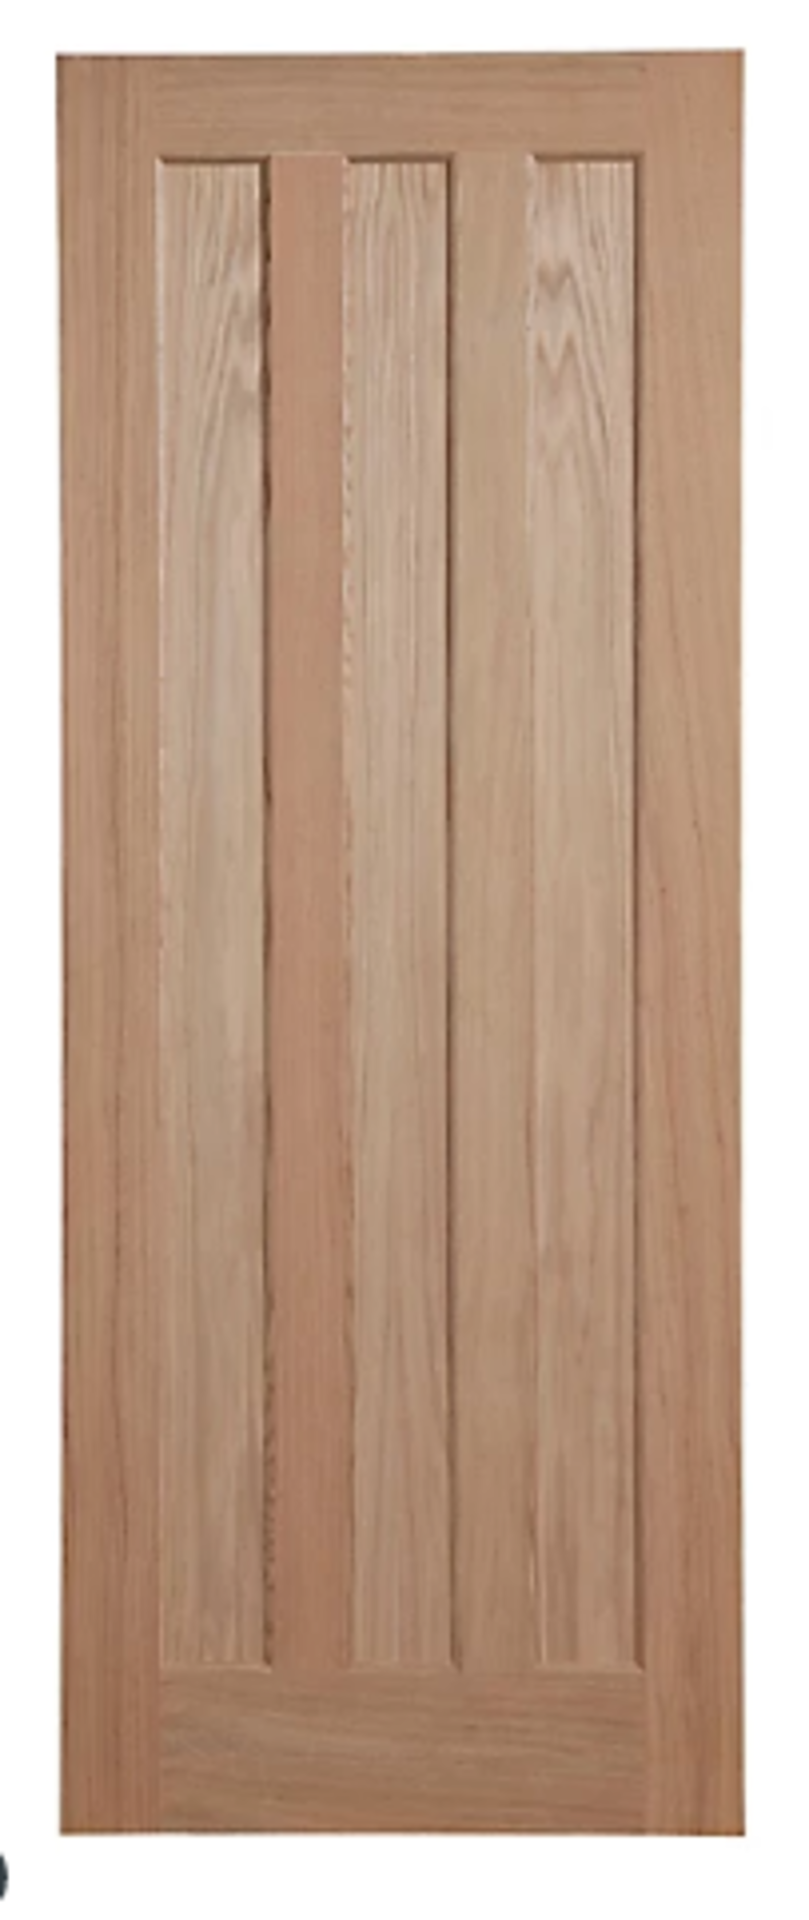 4 X MIXED PANEL DOORS/GLAZED DOORS INCLUDING CLEAR PINE, OAK VENEER, KNOTTY PINES AND MORE (CONTAINS - Image 3 of 5